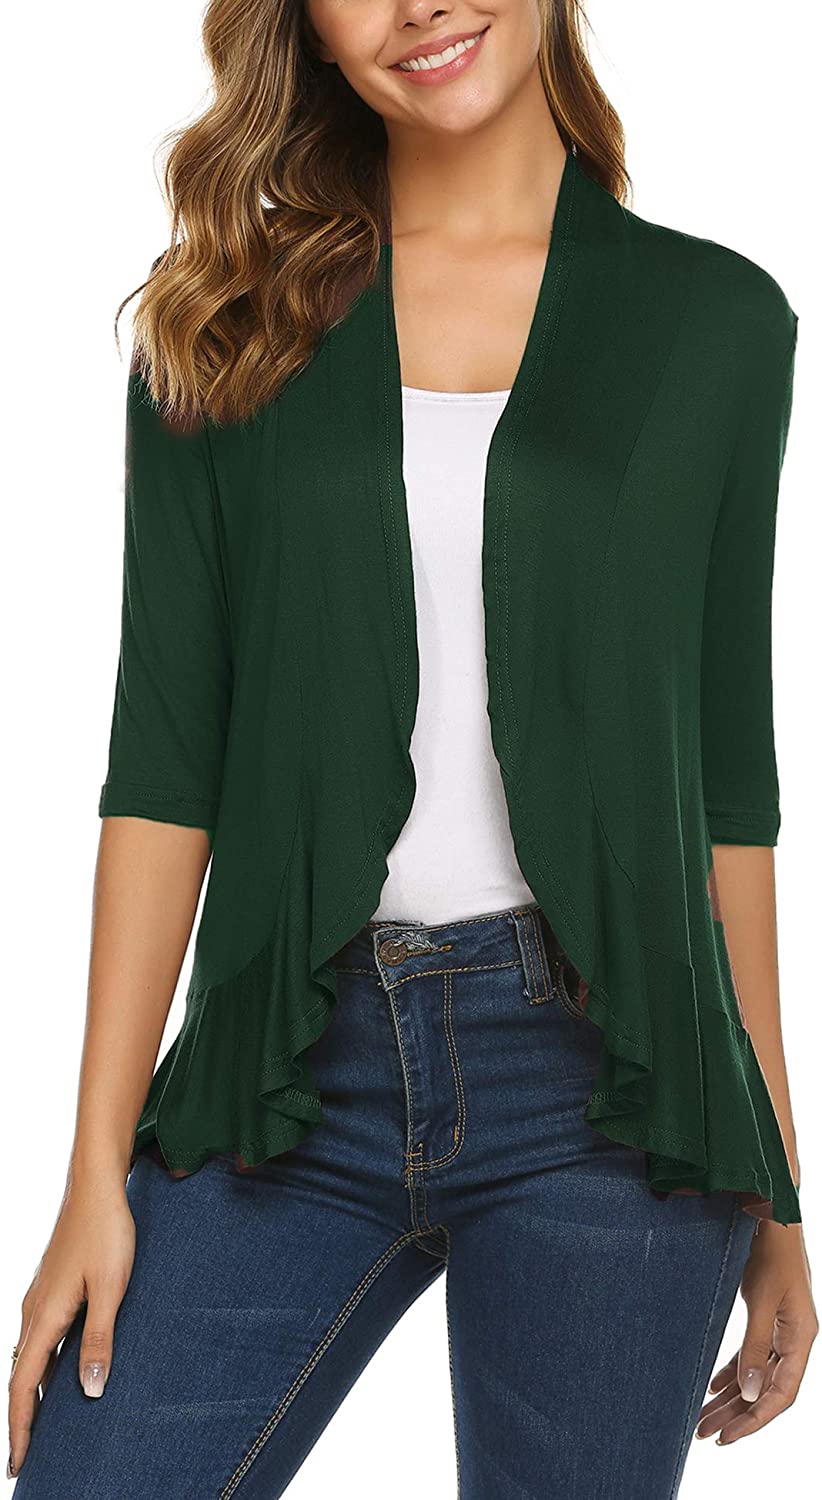 Thousands of items added daily Zeagoo Women's Open Front Cardigan 3/4 ...